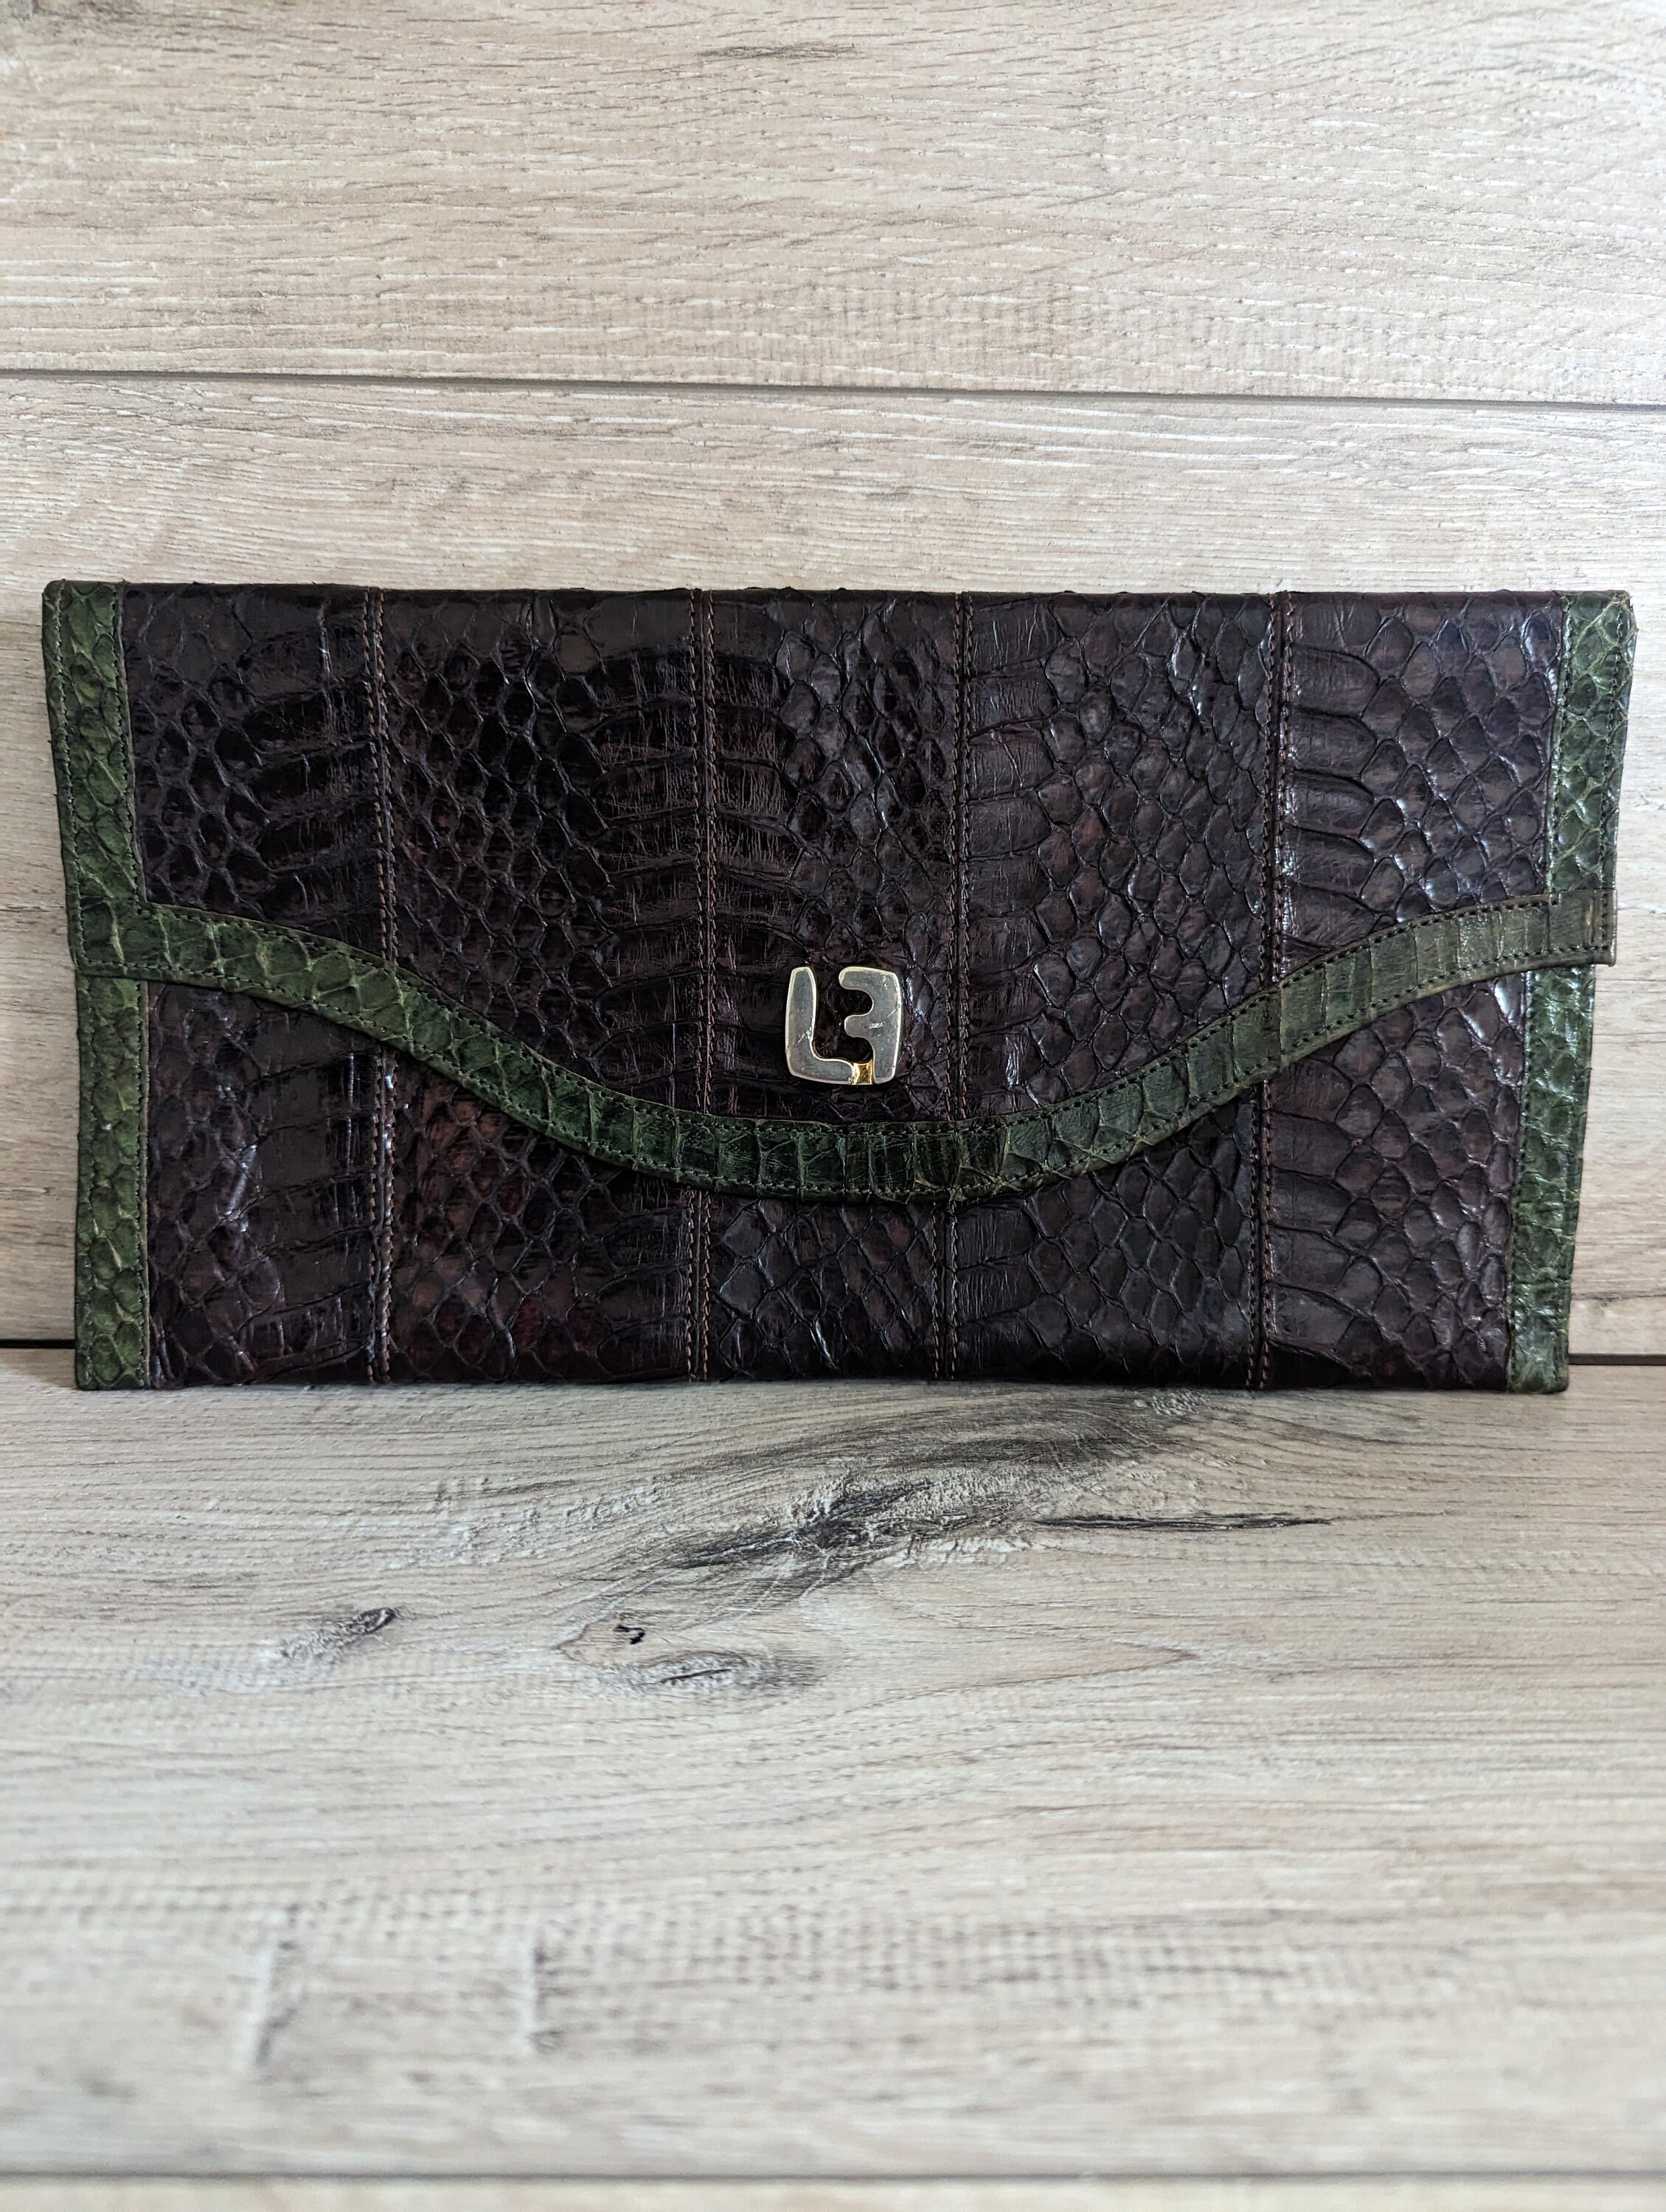 authentic Feraud Paris wallet - genuine leather, Luxury, Bags & Wallets on  Carousell